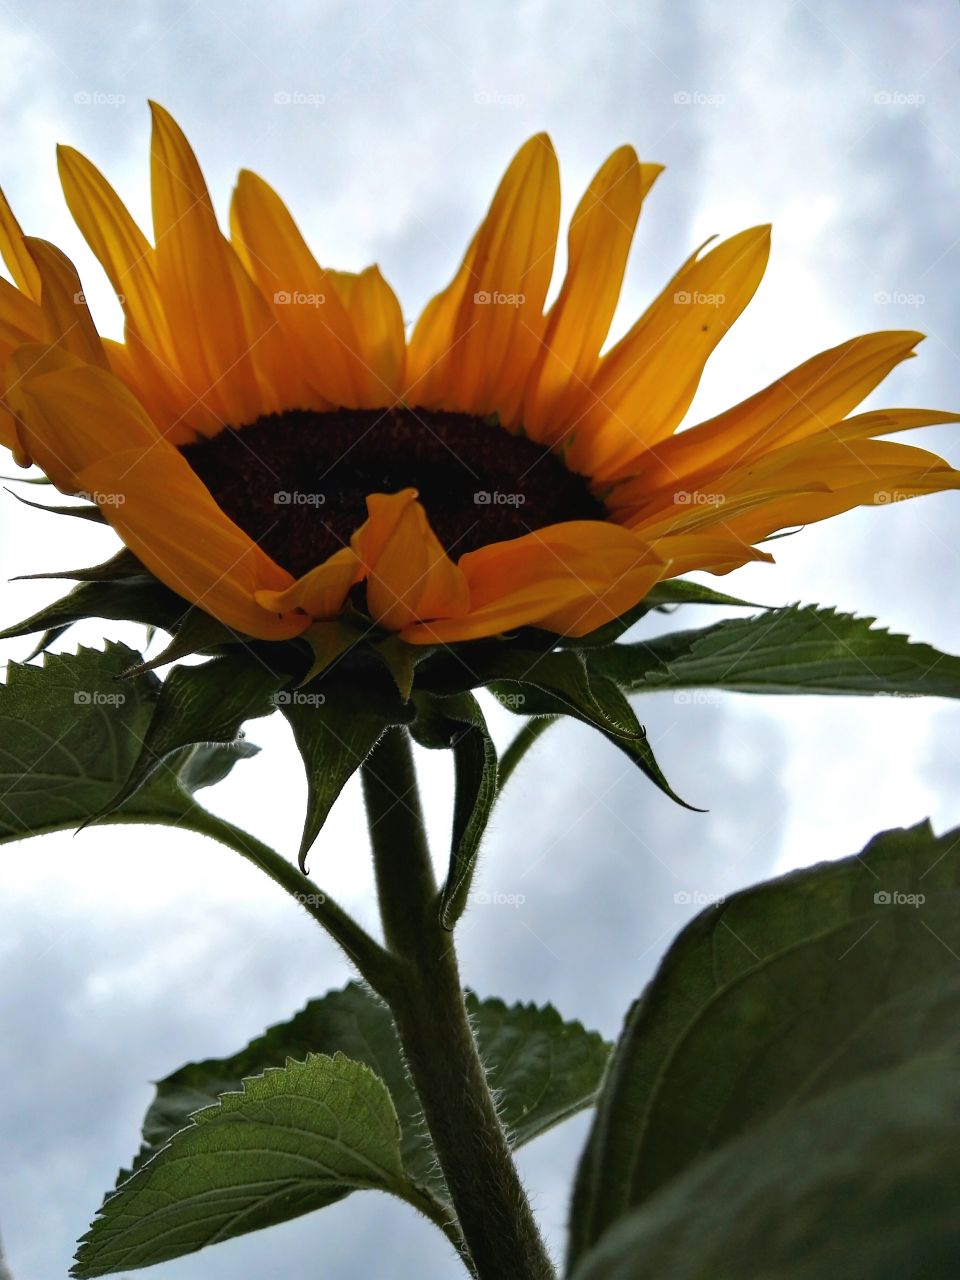 sunflower on the background of stormy sky